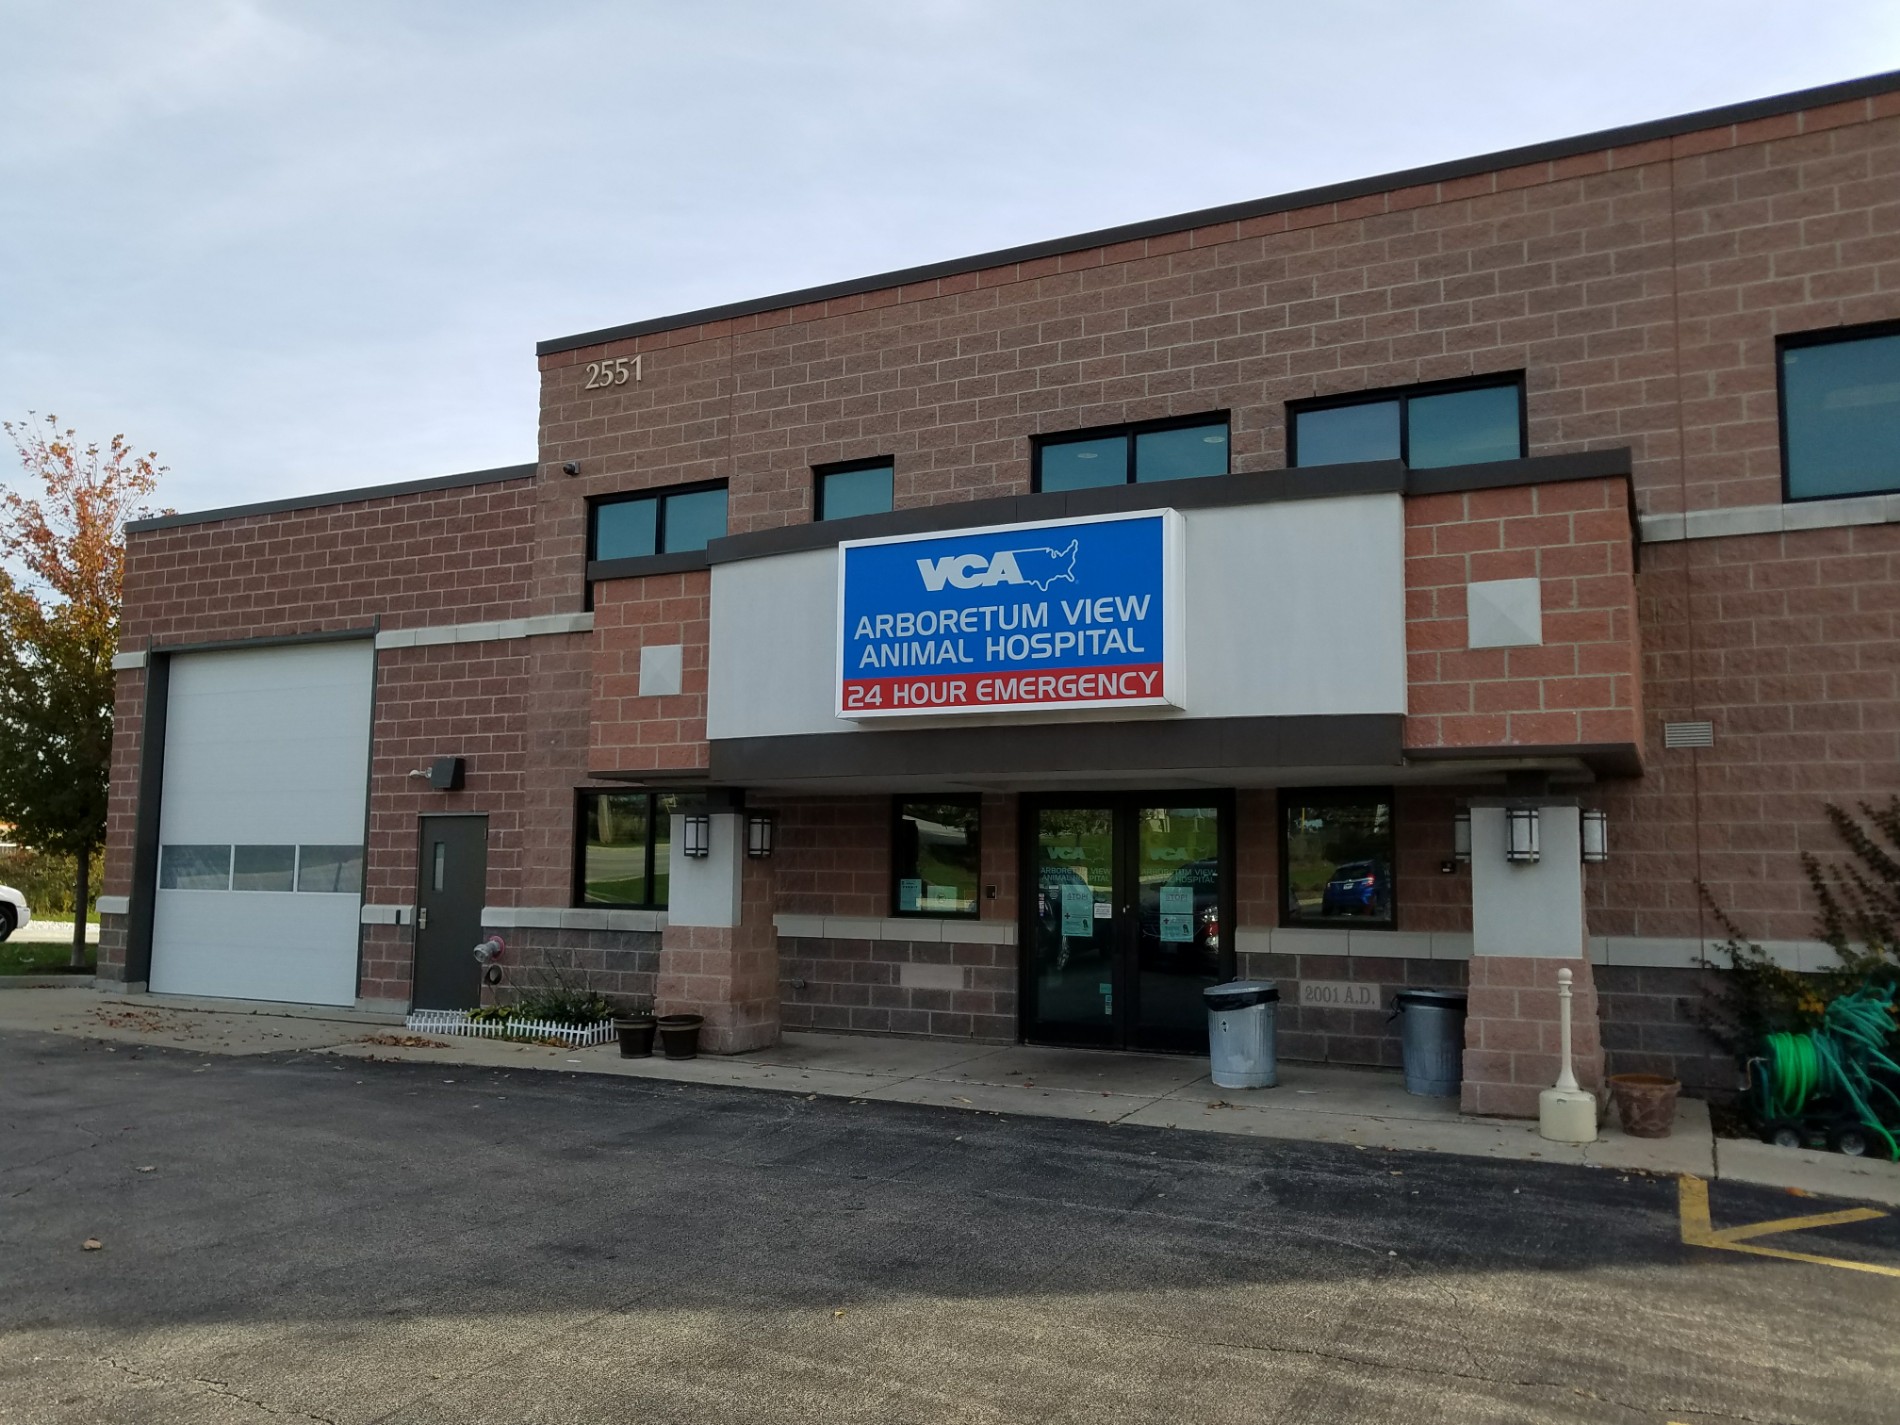 Welcome to VCA Arboretum View Animal Hospital!